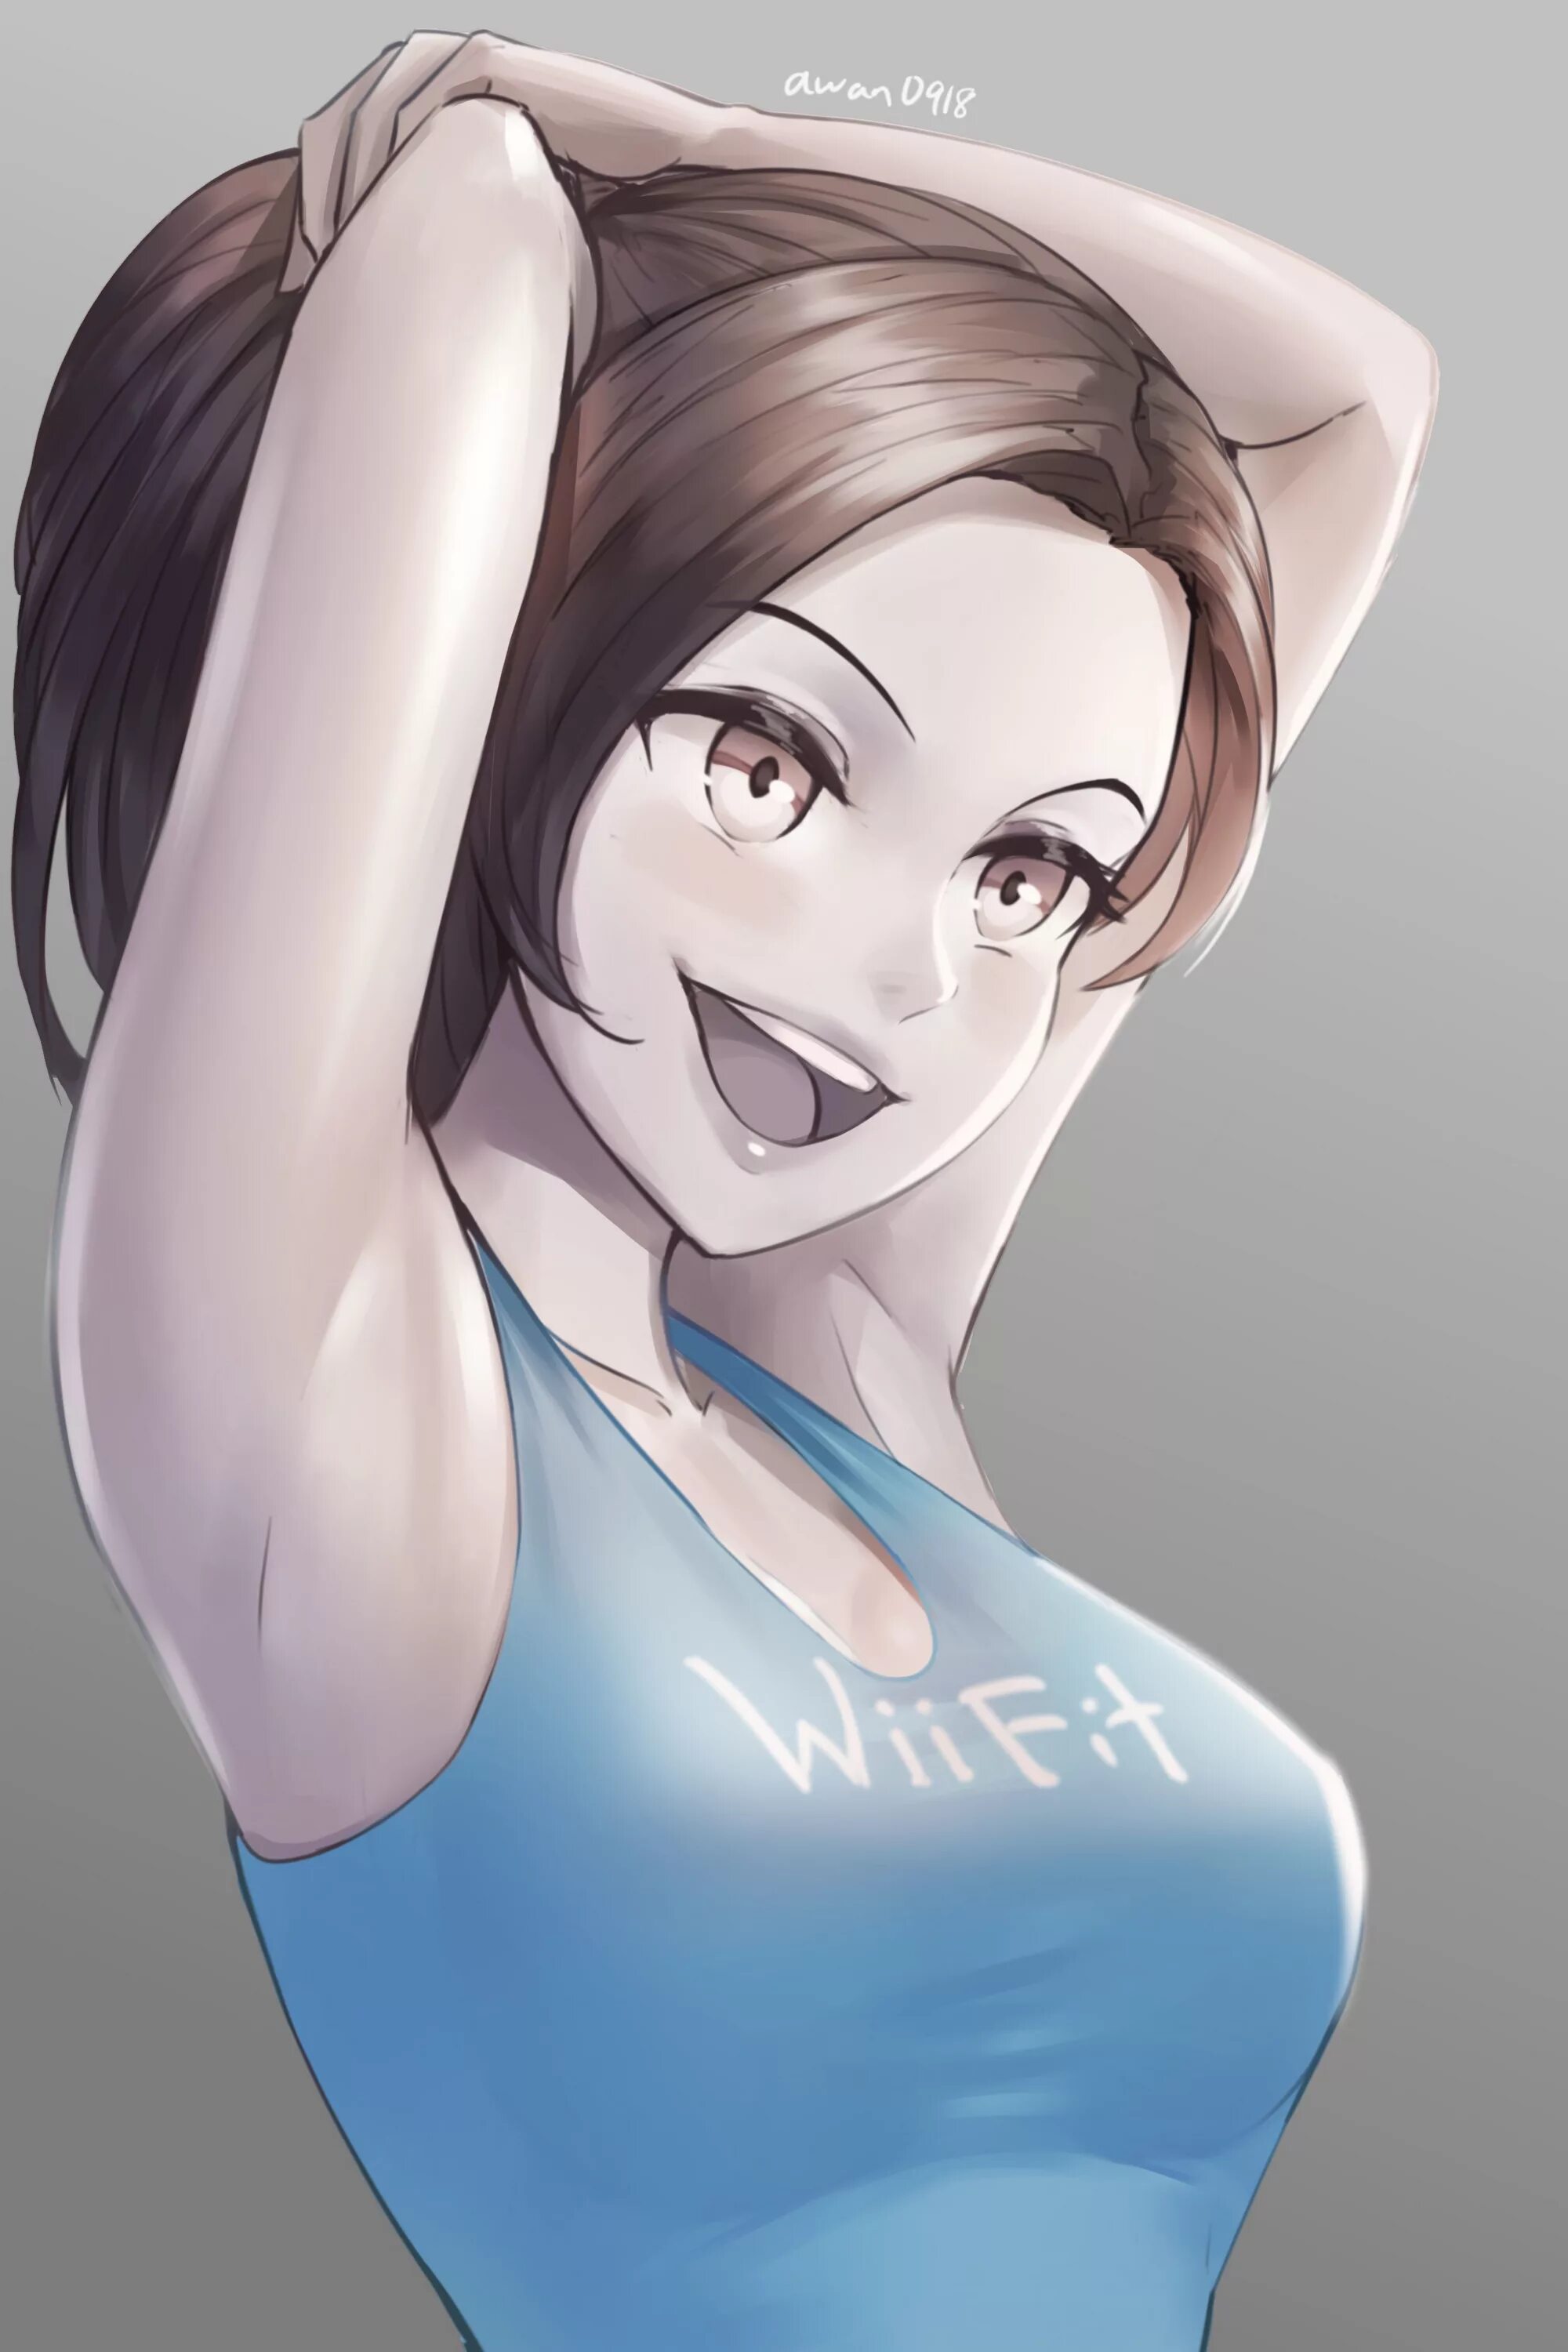 Wii Fit Trainer. Тренер Wii Fit Art. Wii Fit Trainer арт. Nintendo Wii Fit Trainer.